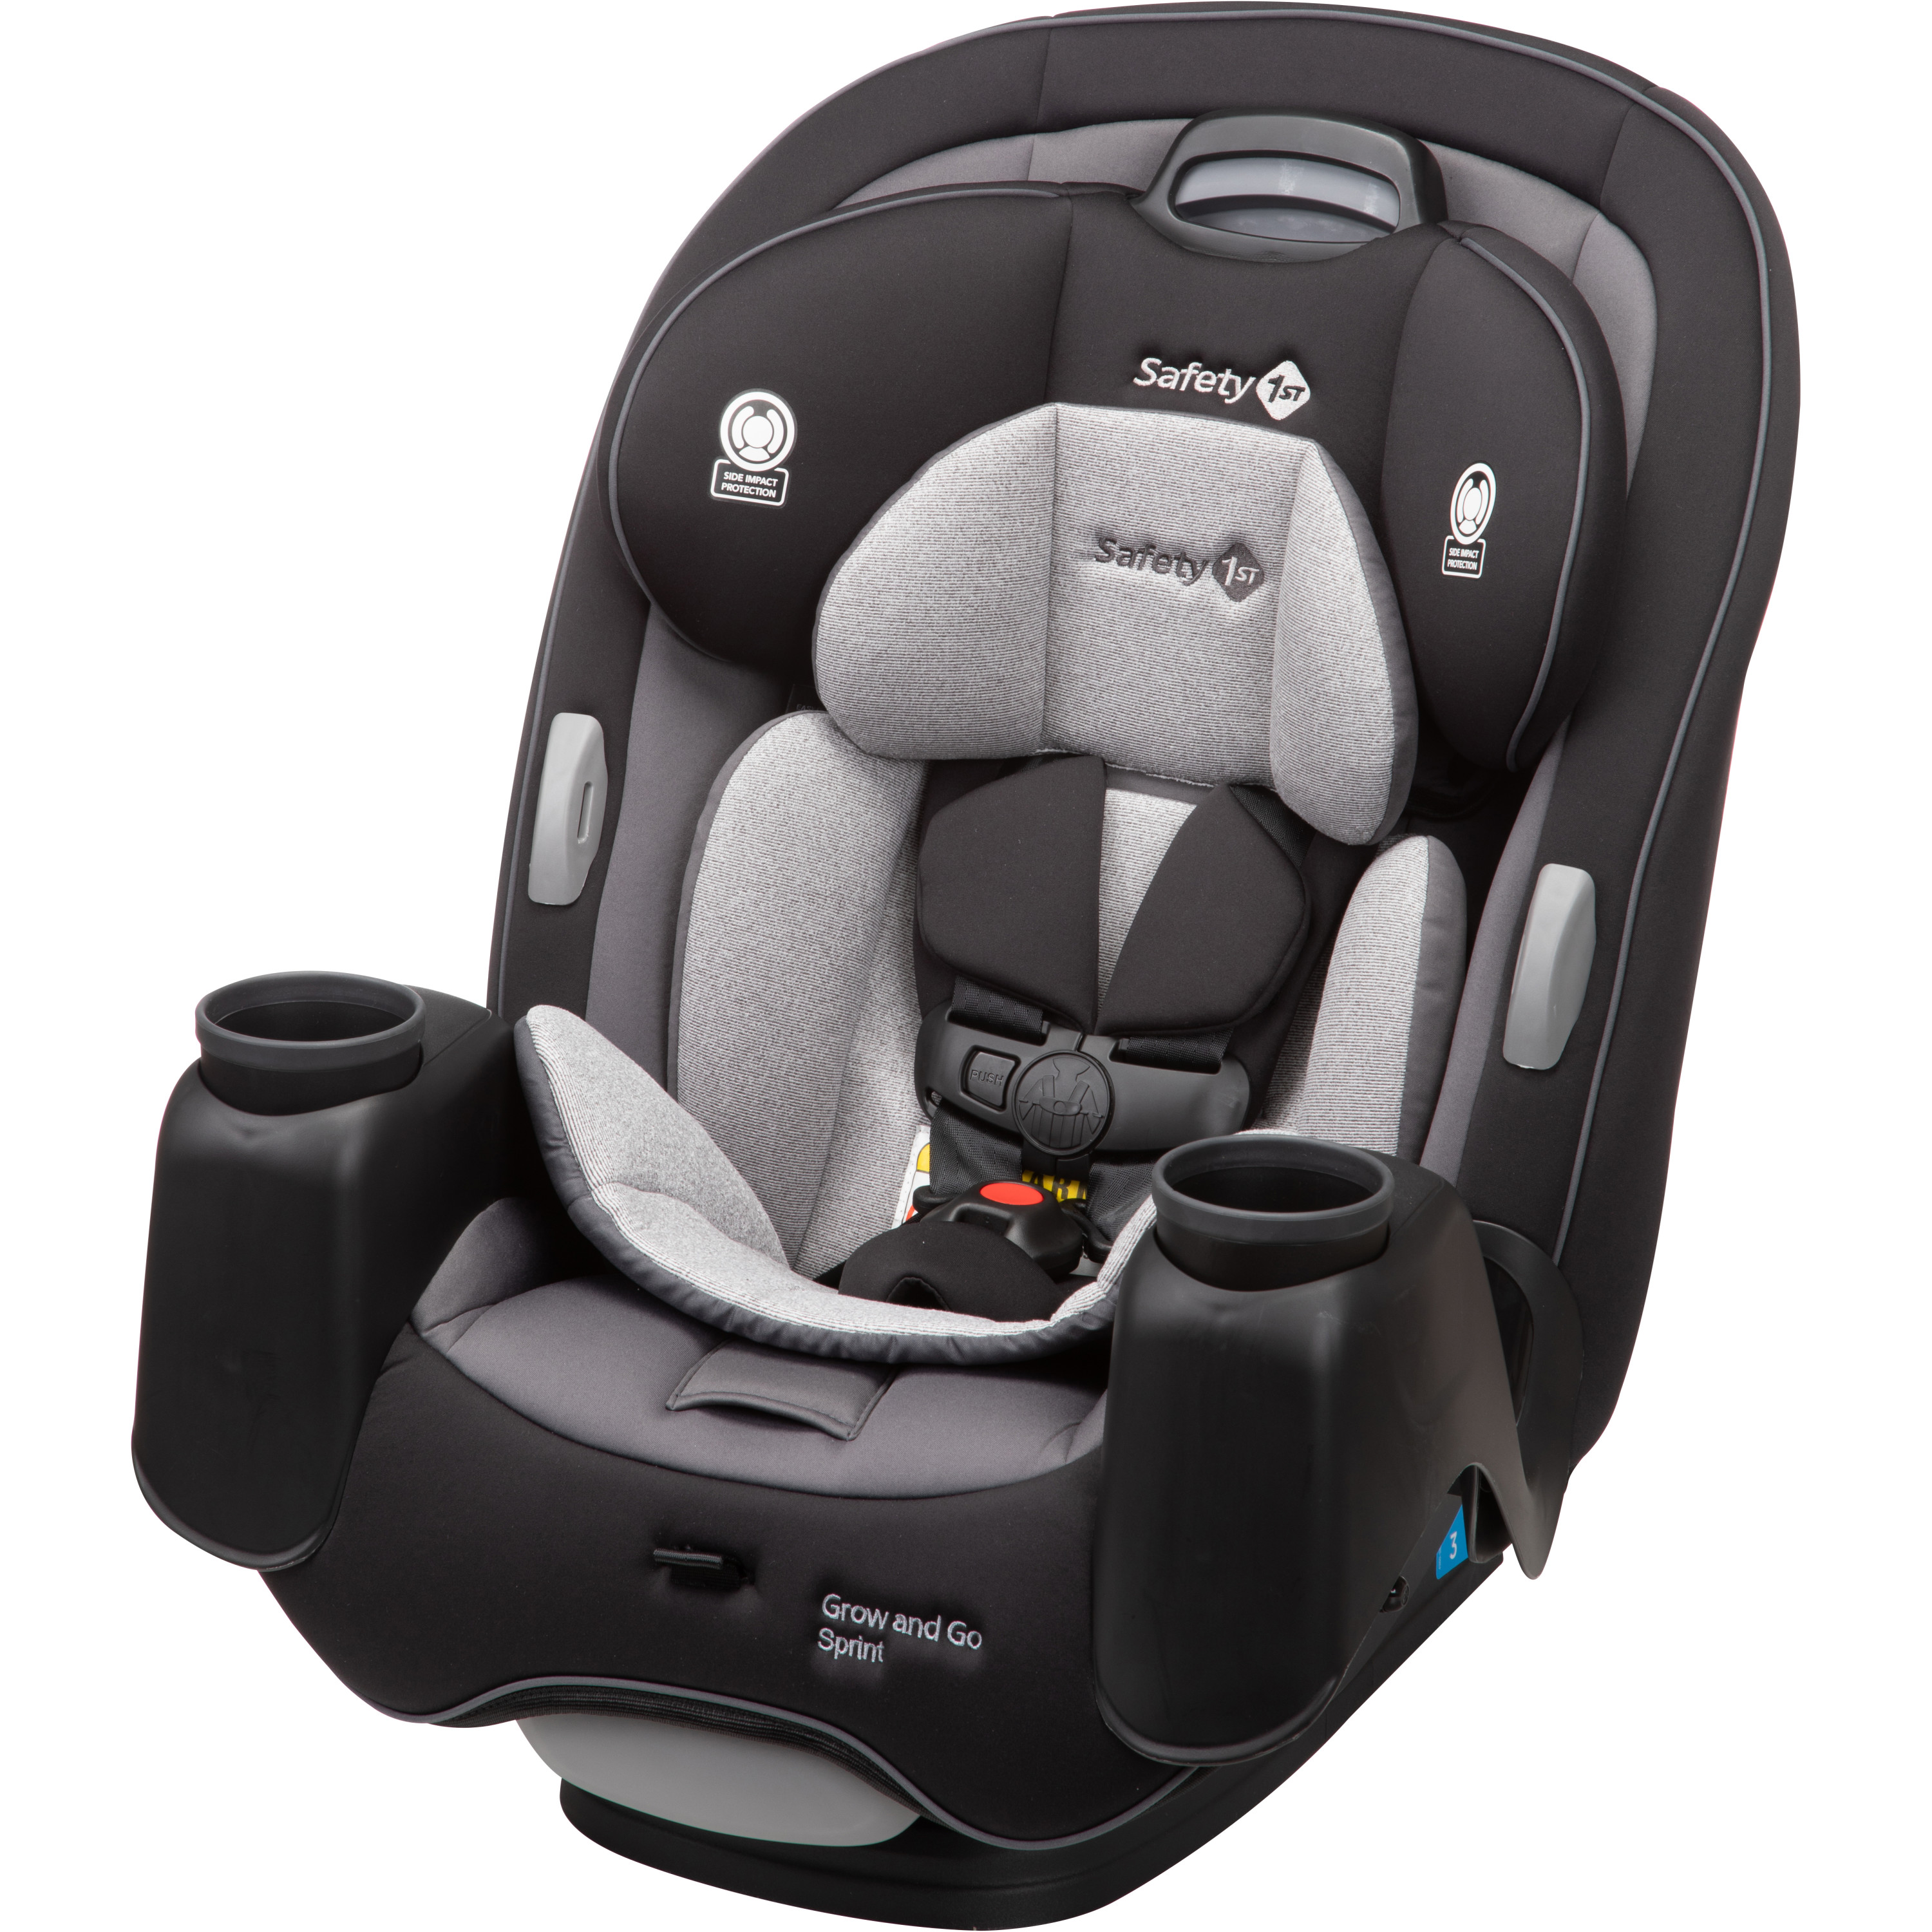 Safety 1st Grow and Go Sprint All-in-One Convertible Car Seat, Soapstone II - image 1 of 27